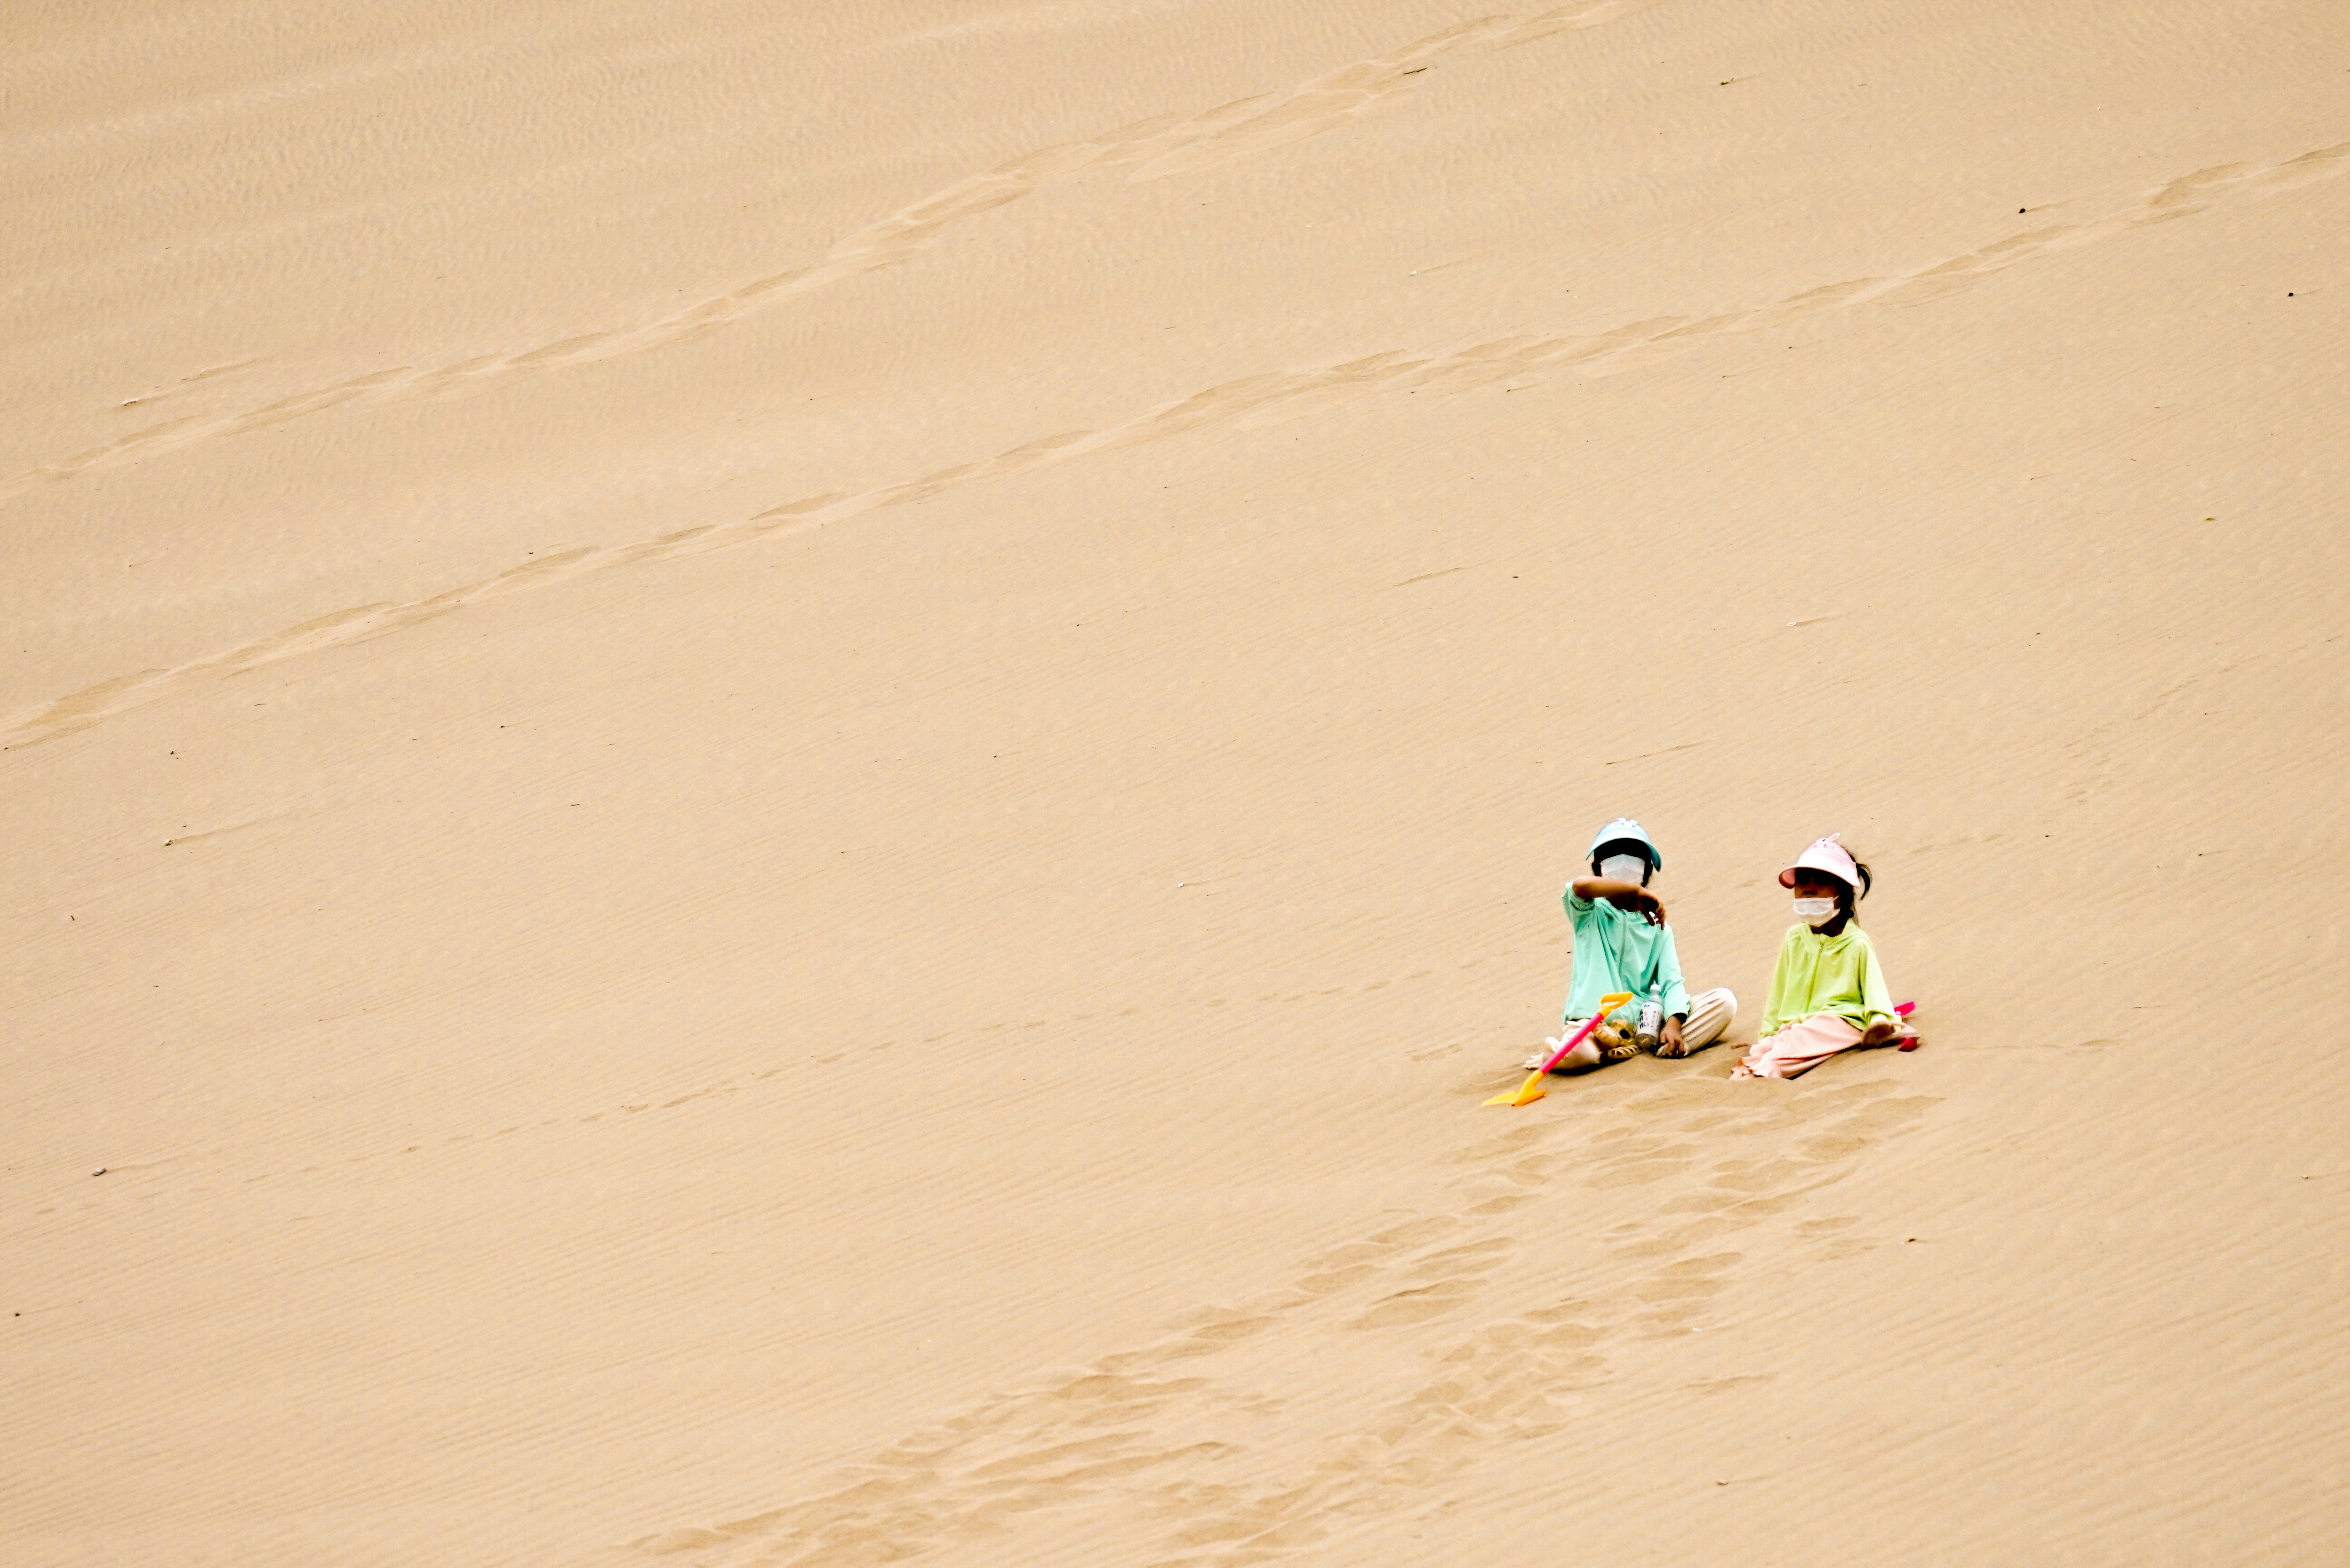 2 children in green and yellow wet suit walking on brown sand during daytime